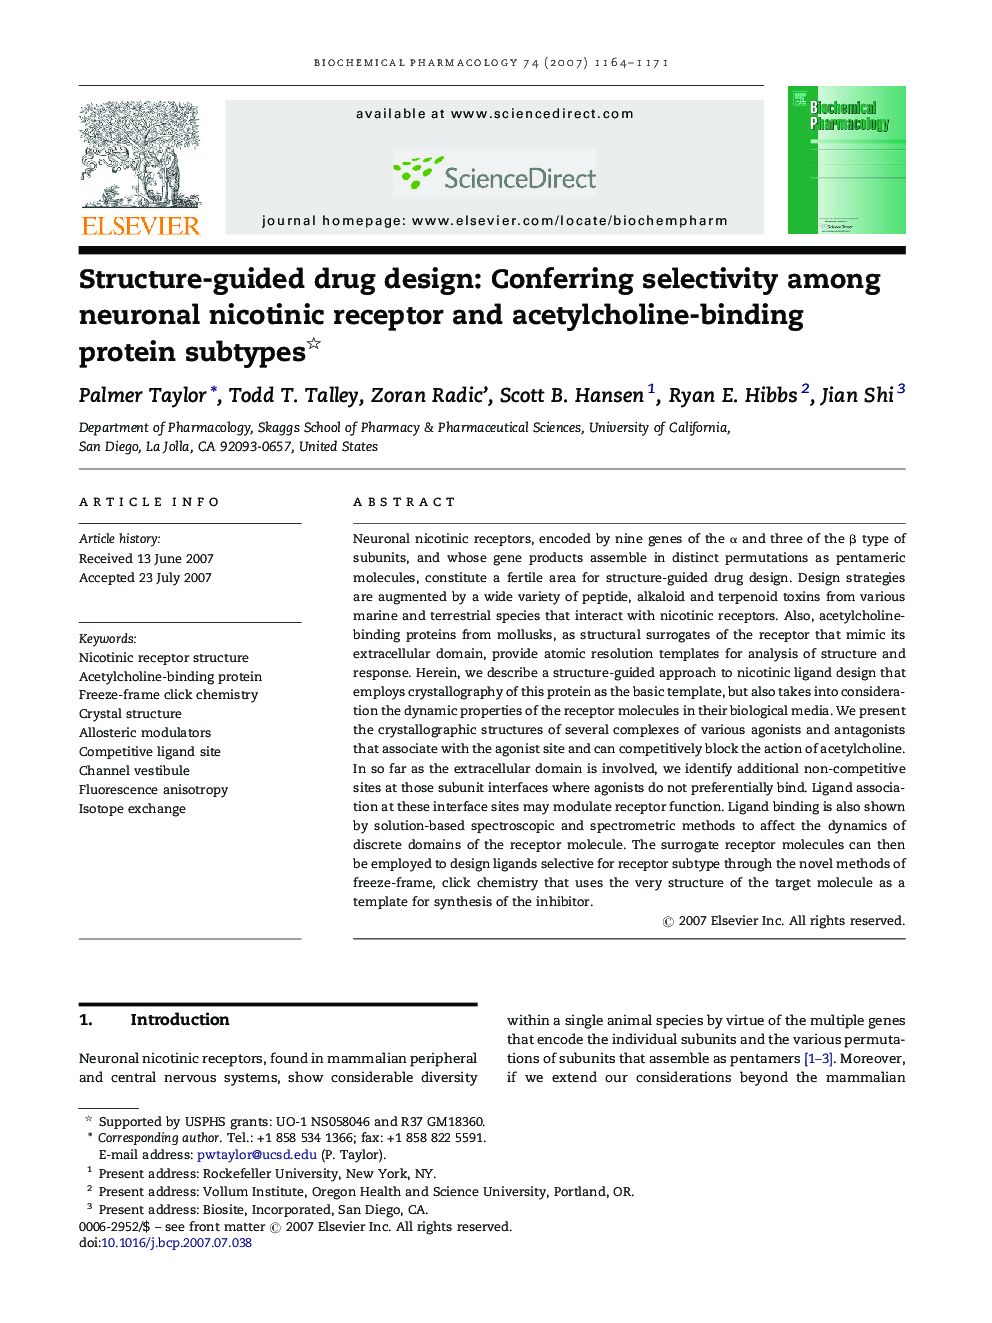 Structure-guided drug design: Conferring selectivity among neuronal nicotinic receptor and acetylcholine-binding protein subtypes 